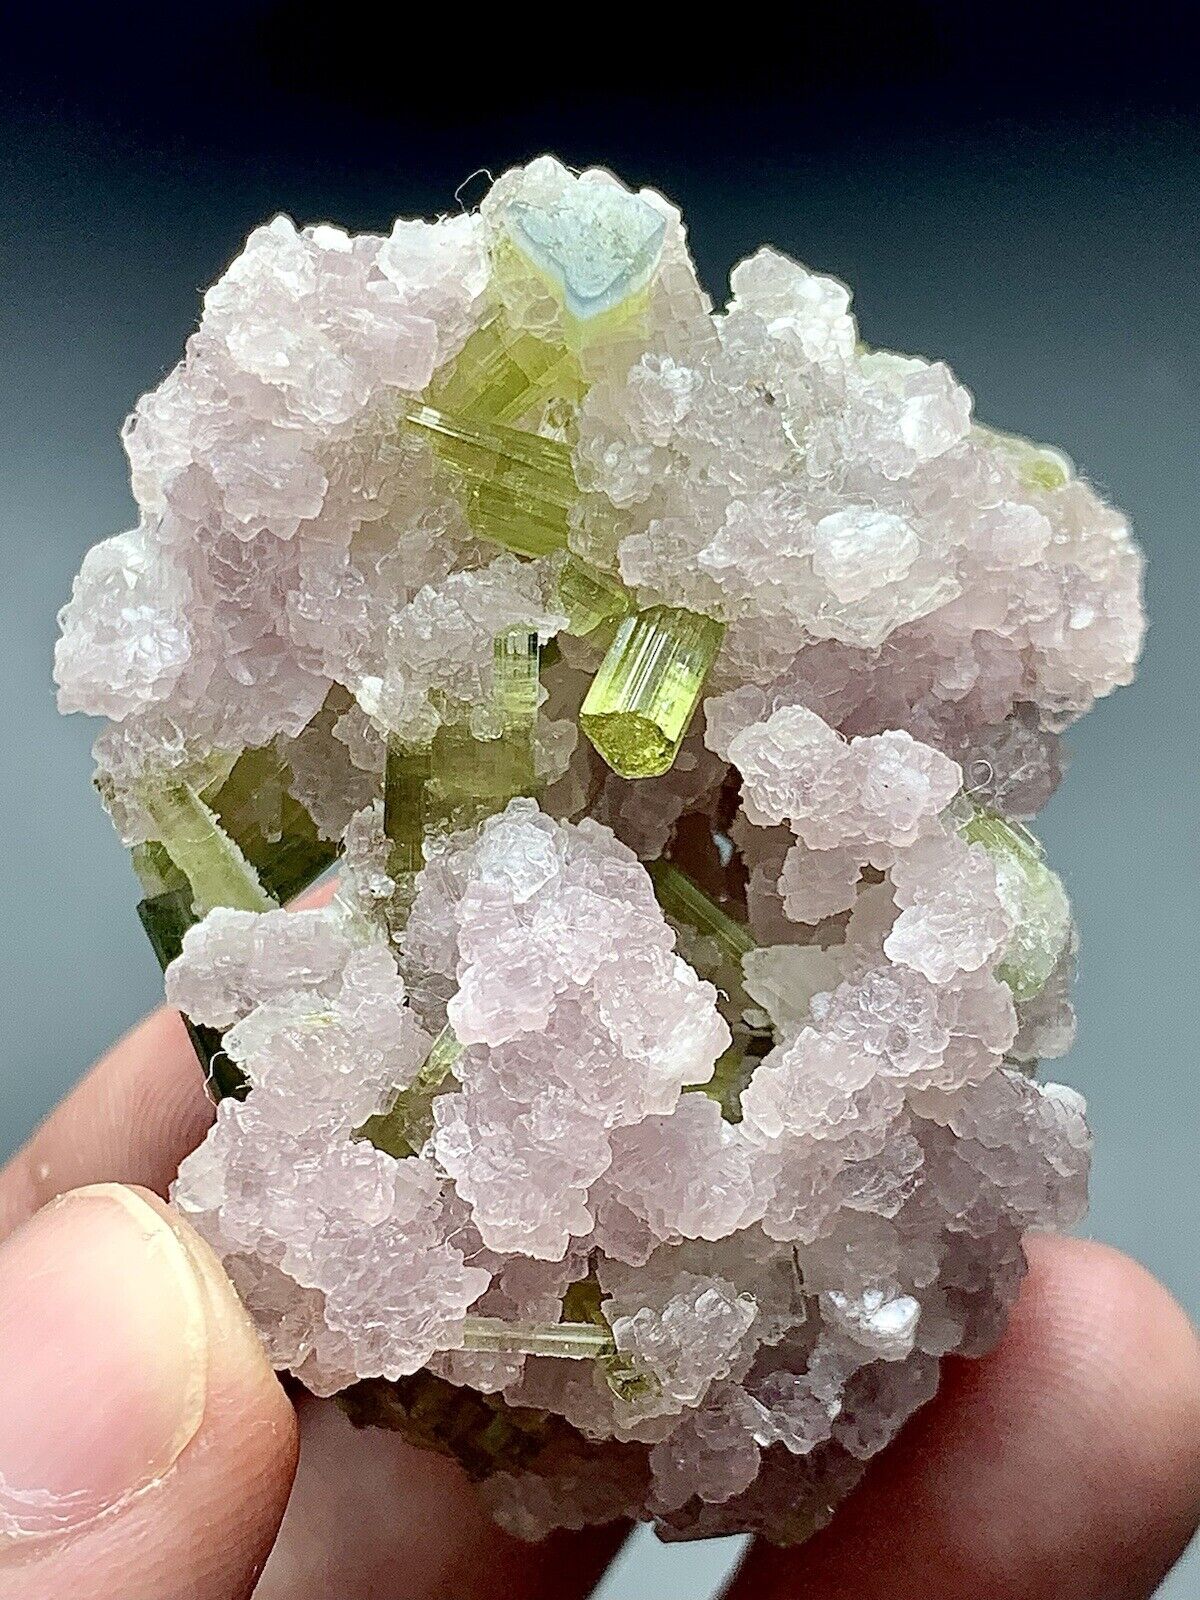 258 CT Tourmaline Crystals Combine With Lepidolite Mica From Afghanistan